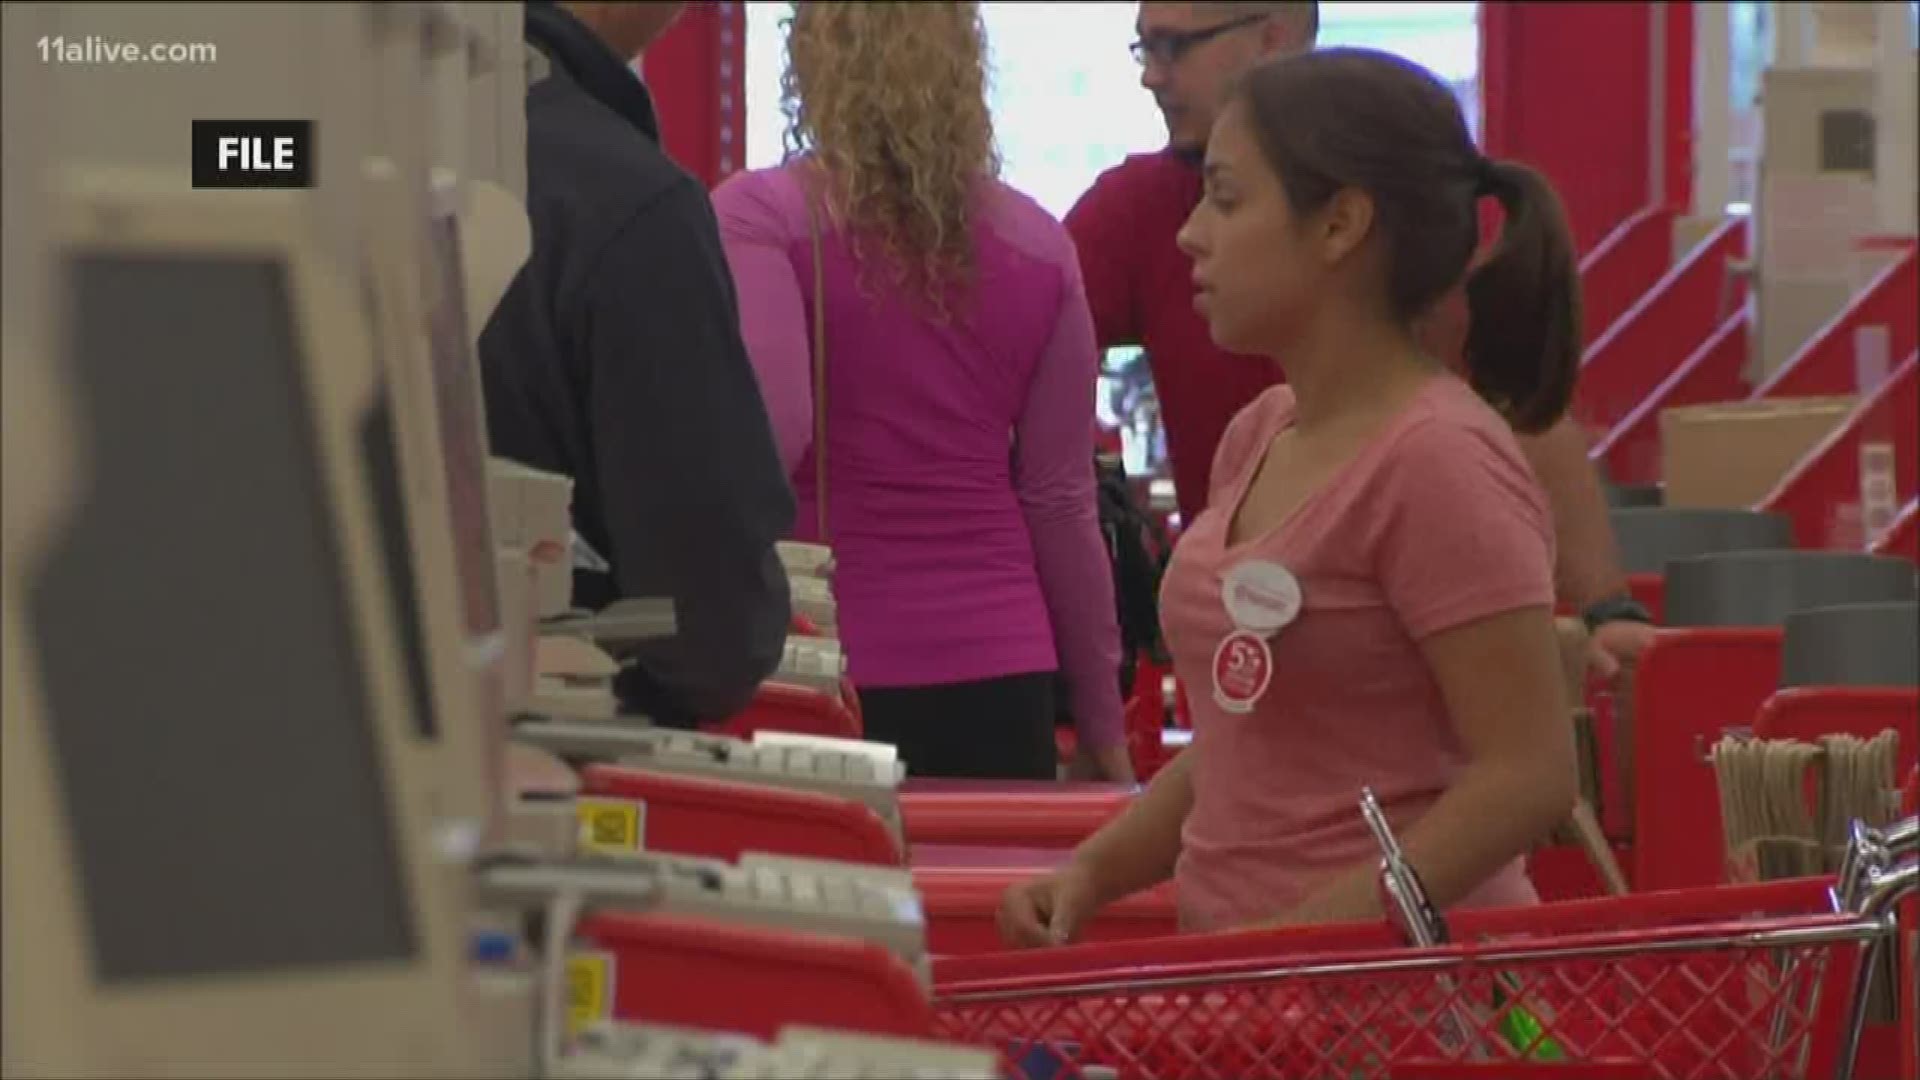 Target's tech trouble clogged stores Saturday with long checkout lines